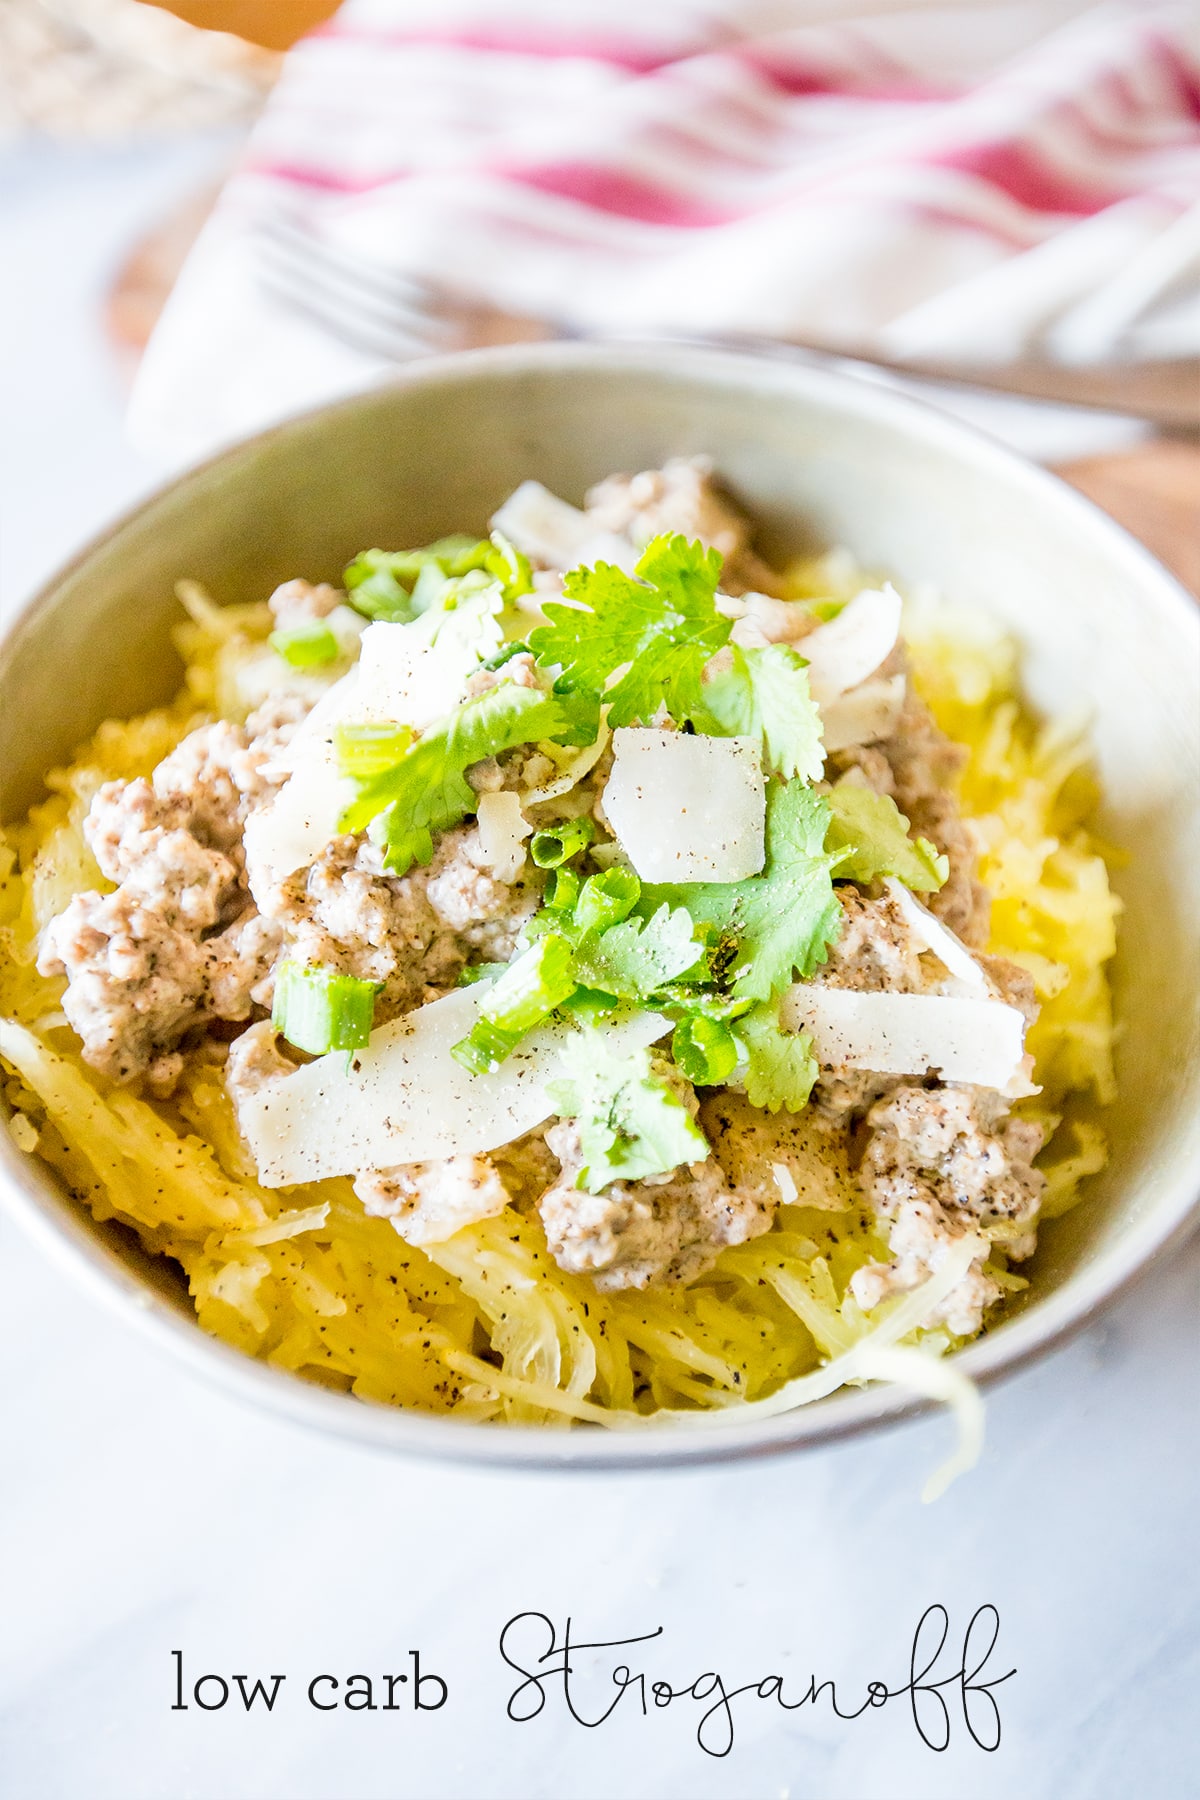 Delicious easy low carb stroganoff- super comforting and this version is lightened up for guilt-free dinners!